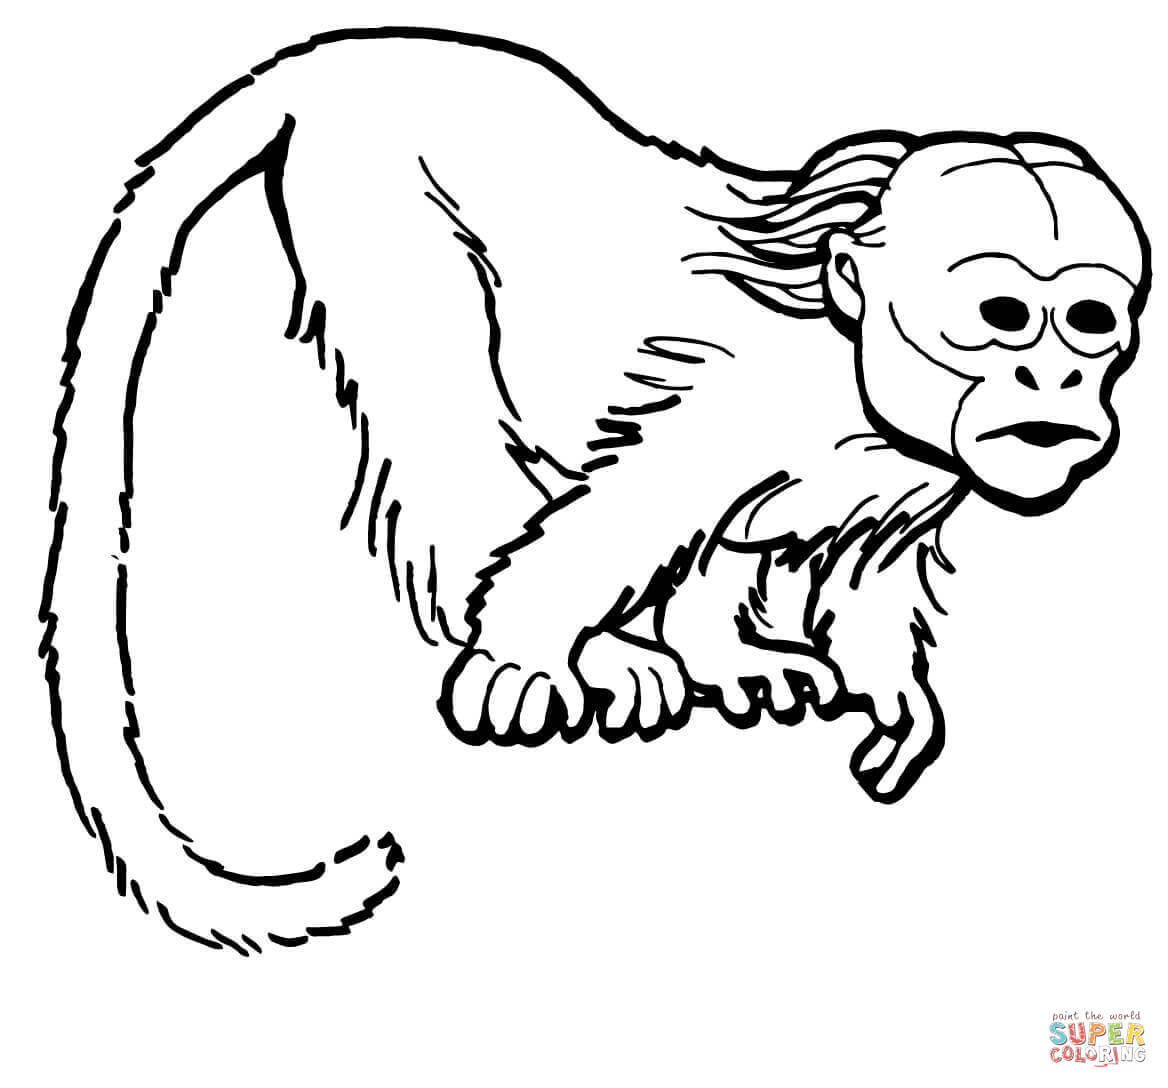 Coloring Pages Of Monkeys Curious Uakari Monkey Coloring Page Free Printable Coloring Pages